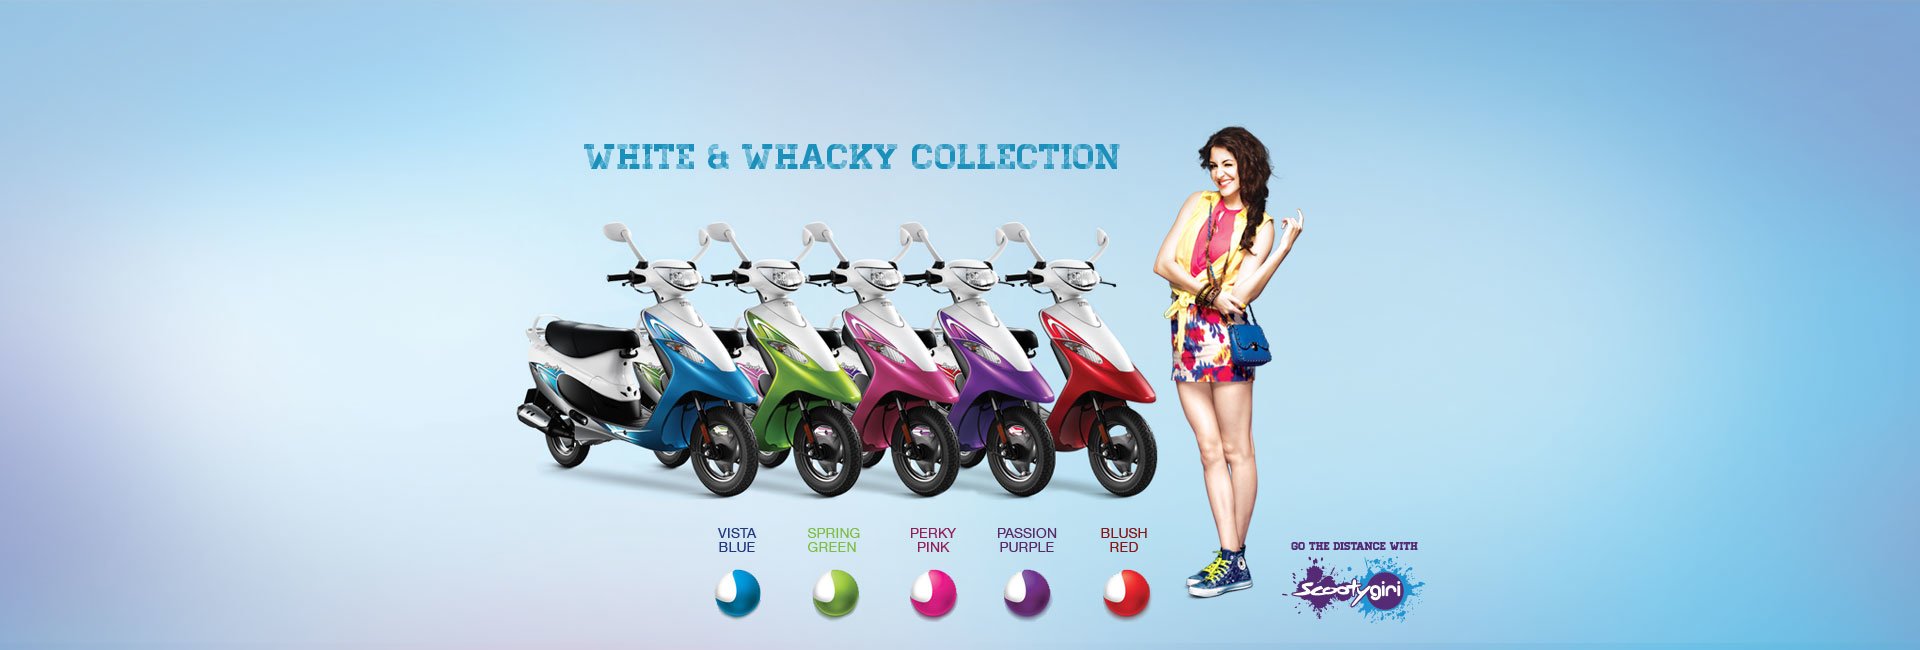 New TVS Scooty Pep Plus 2016 All Colours Official 2